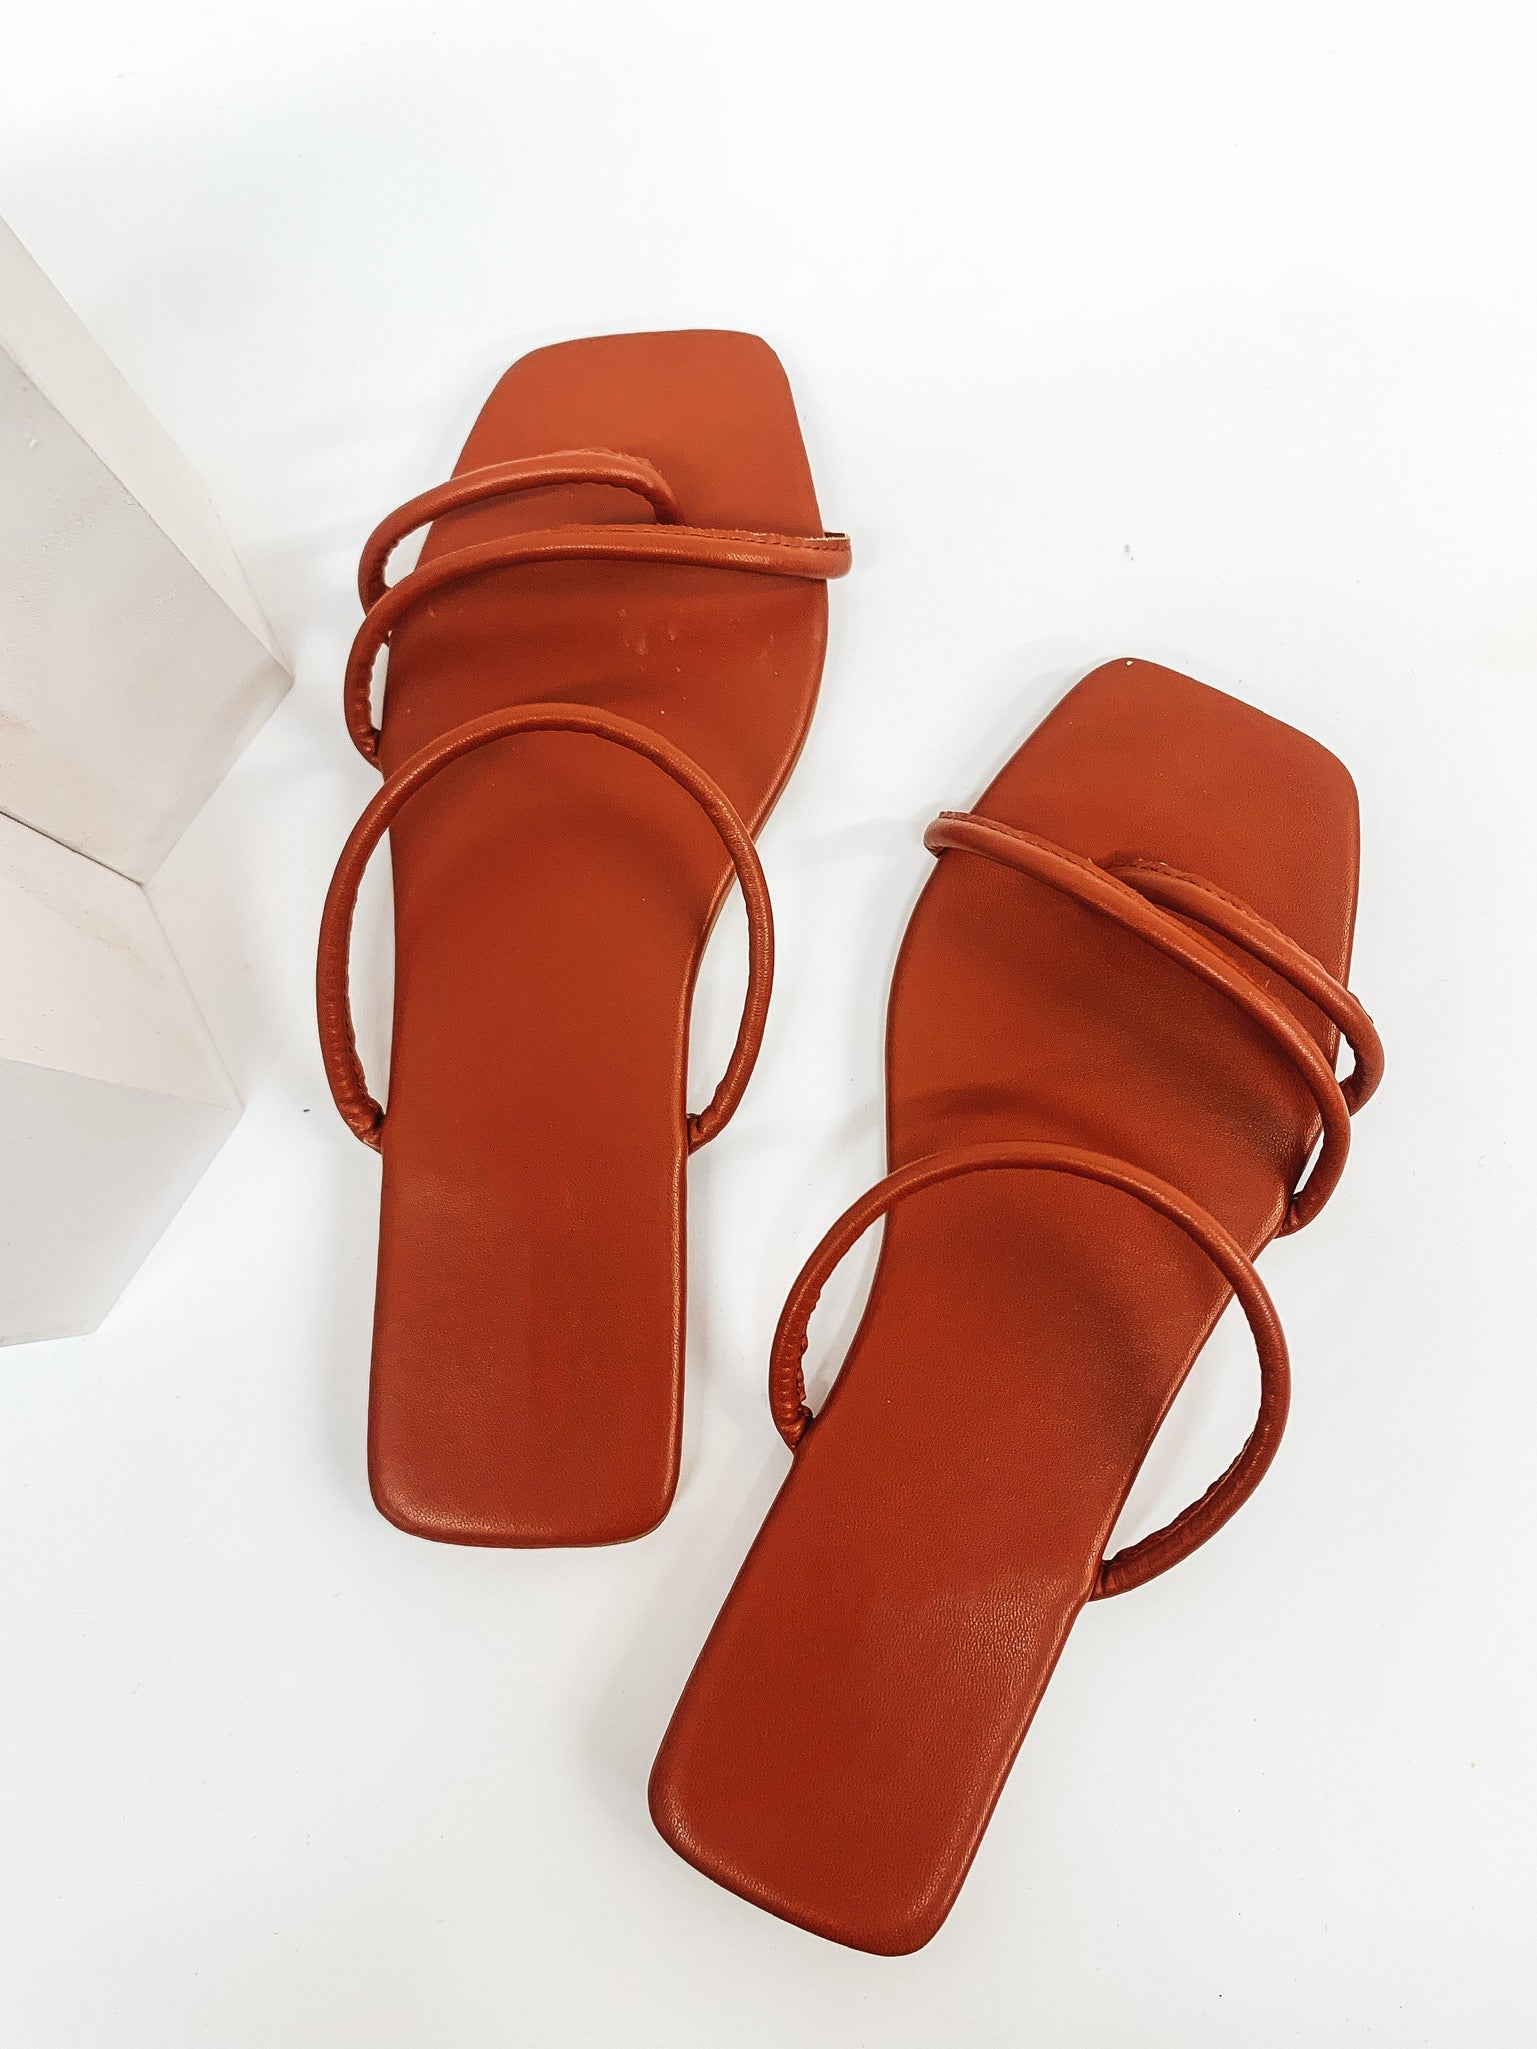 Strut Sis Strappy Square Toe Flat Sandals in Brick - Giddy Up Glamour Boutique